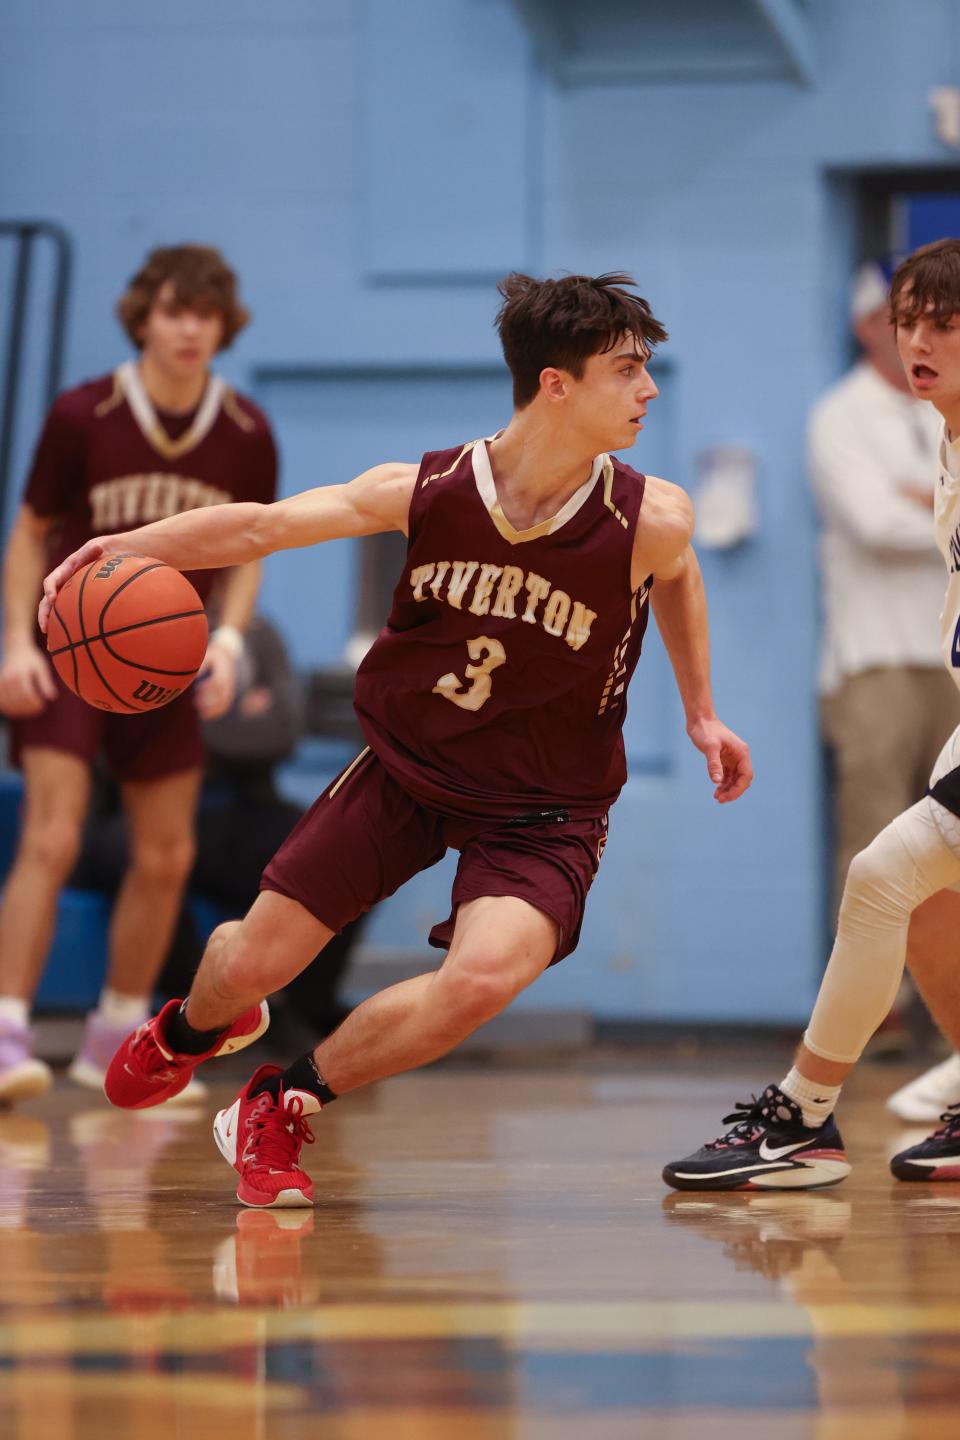 Tiverton's Ben Pacheco scored 10 points in a win over Times 2 Academy on Tuesday.